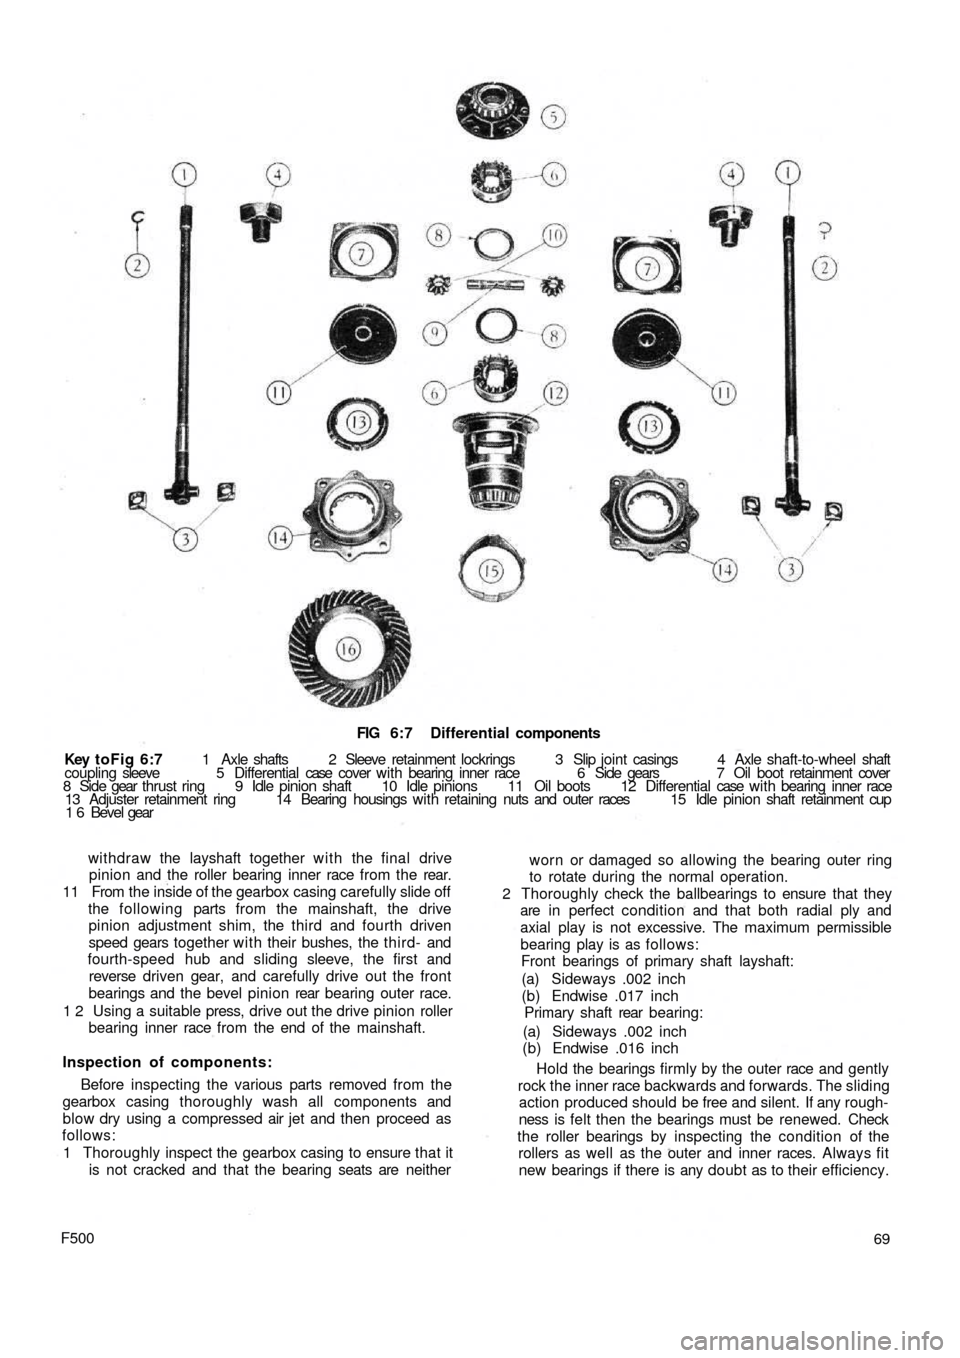 FIAT 500 1957 1.G Workshop Manual FIG 6:7  Differential components
Key toFig  6:7 1  Axle  shafts  2  Sleeve  retainment  lockrings   3   Slip  joint casings  4  Axle  shaft-to-wheel shaft
coupling sleeve  5  Differential case  cover 